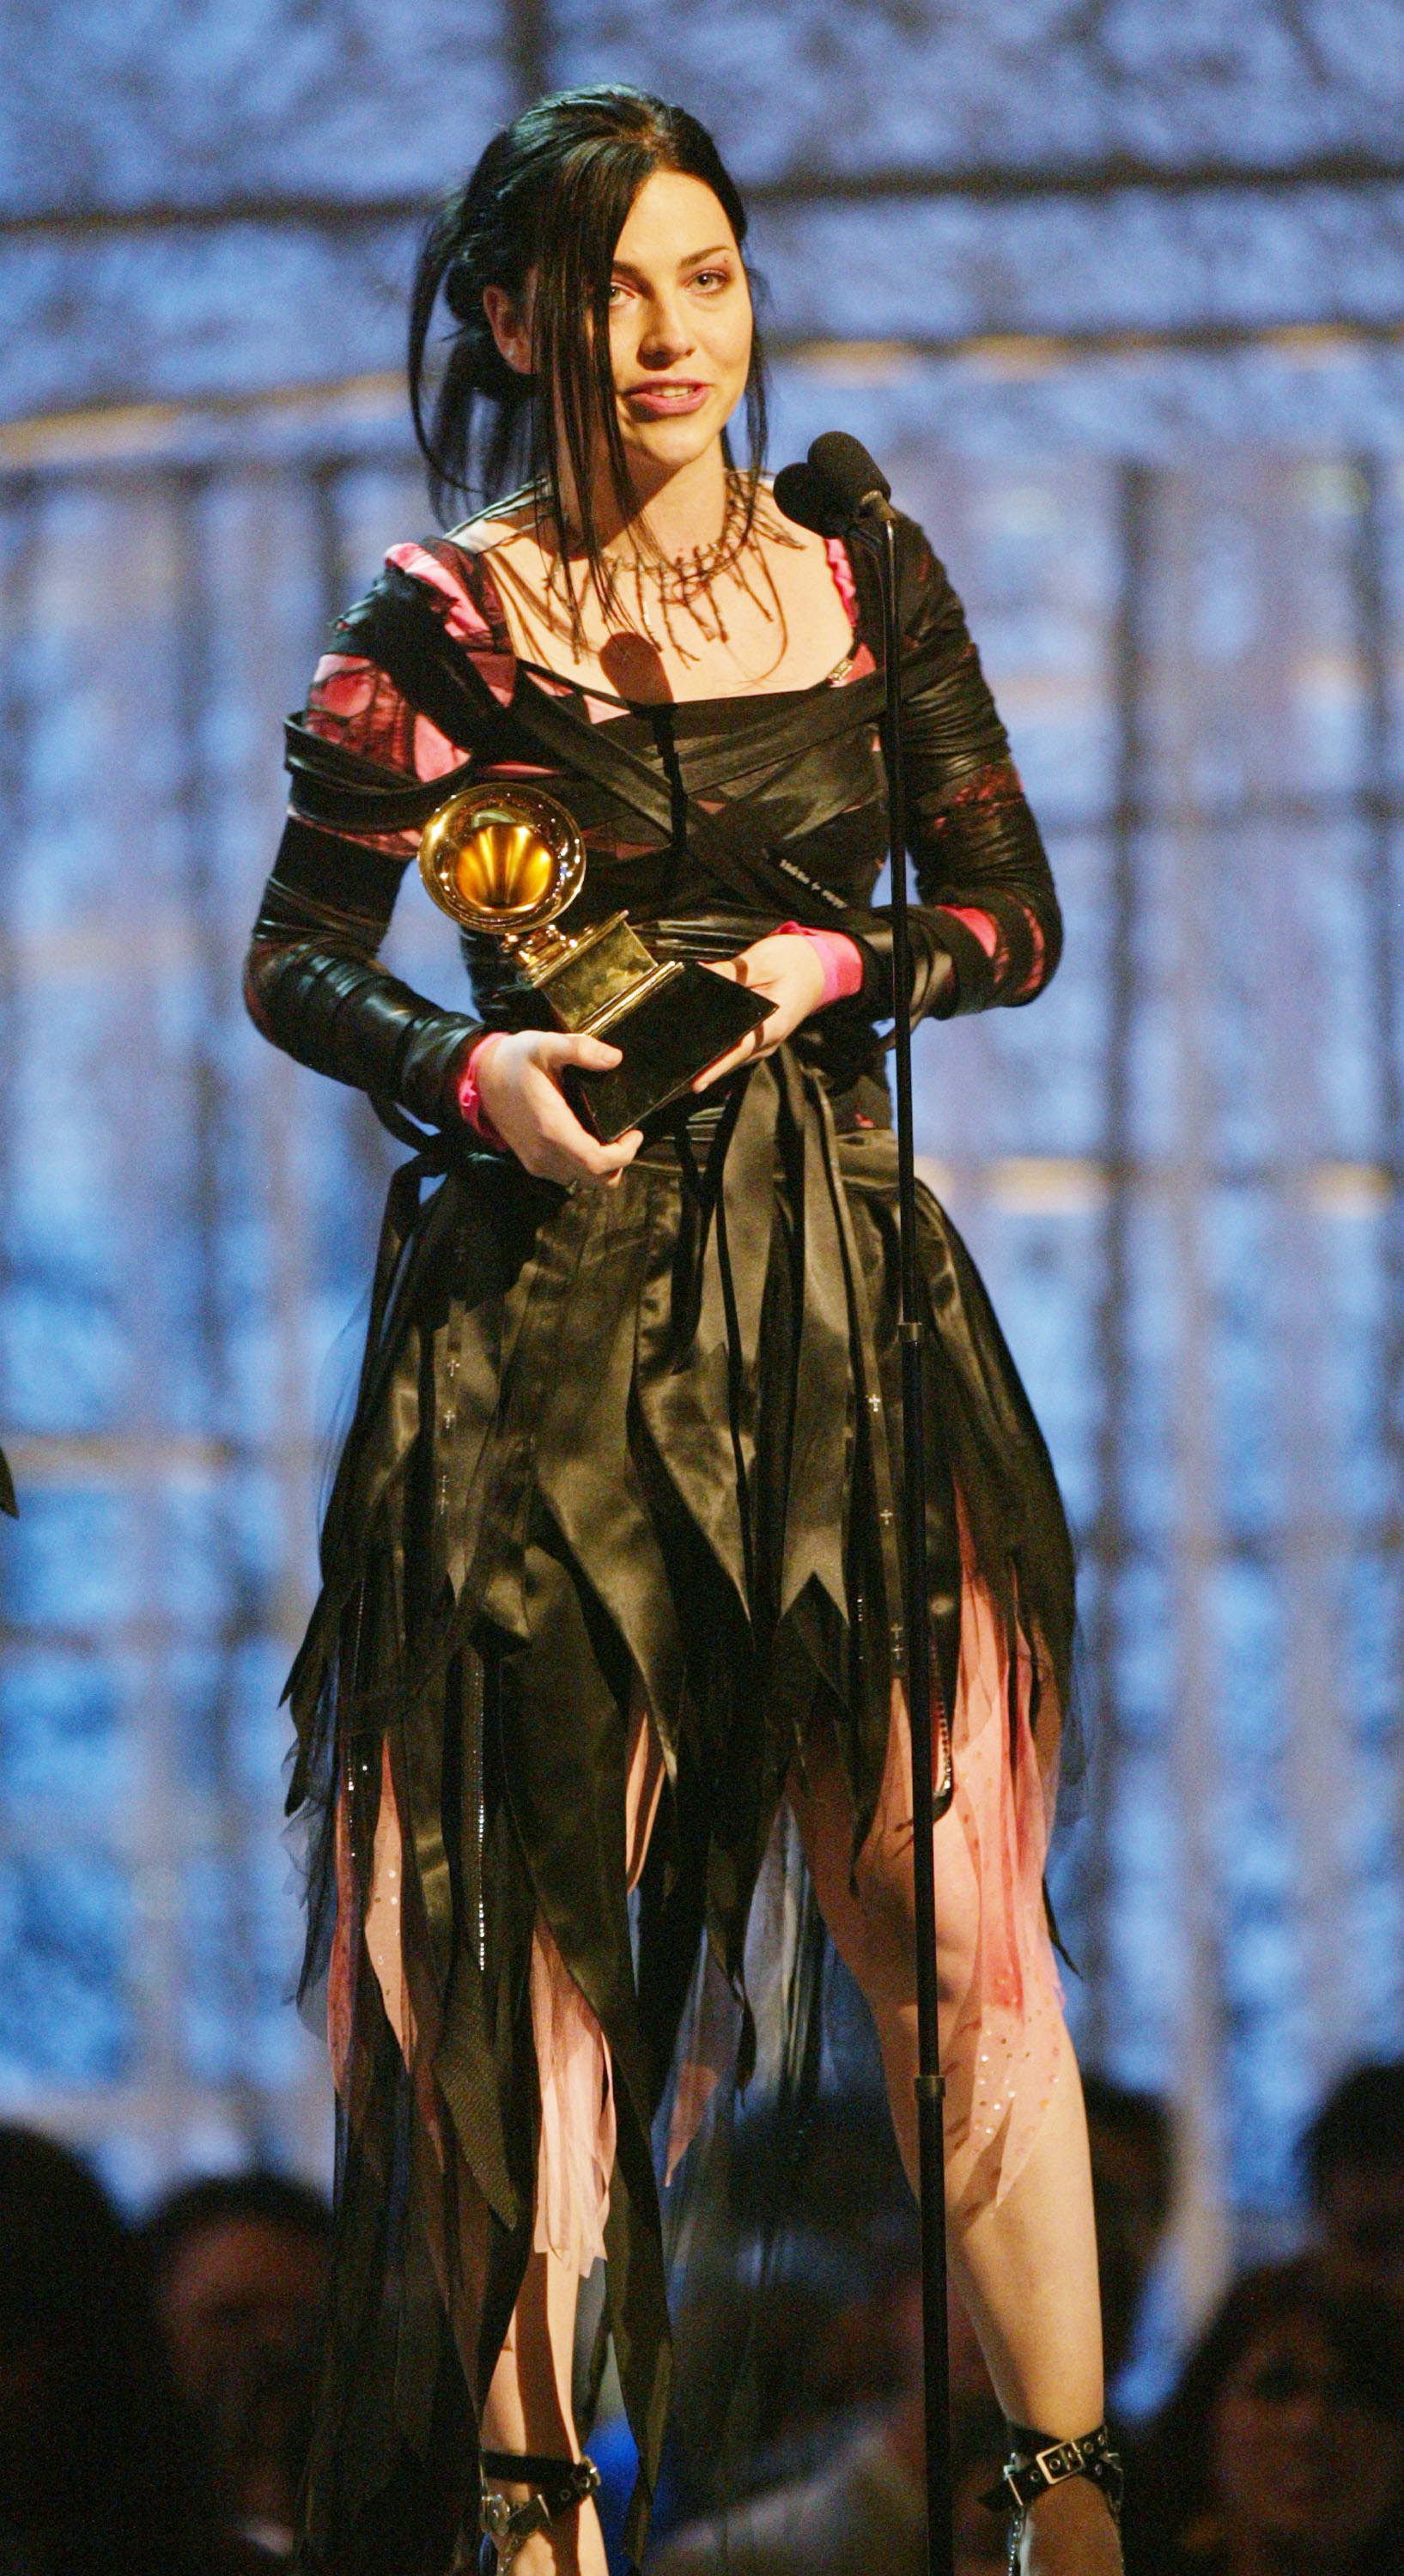 Amy Lee accepting a Grammy